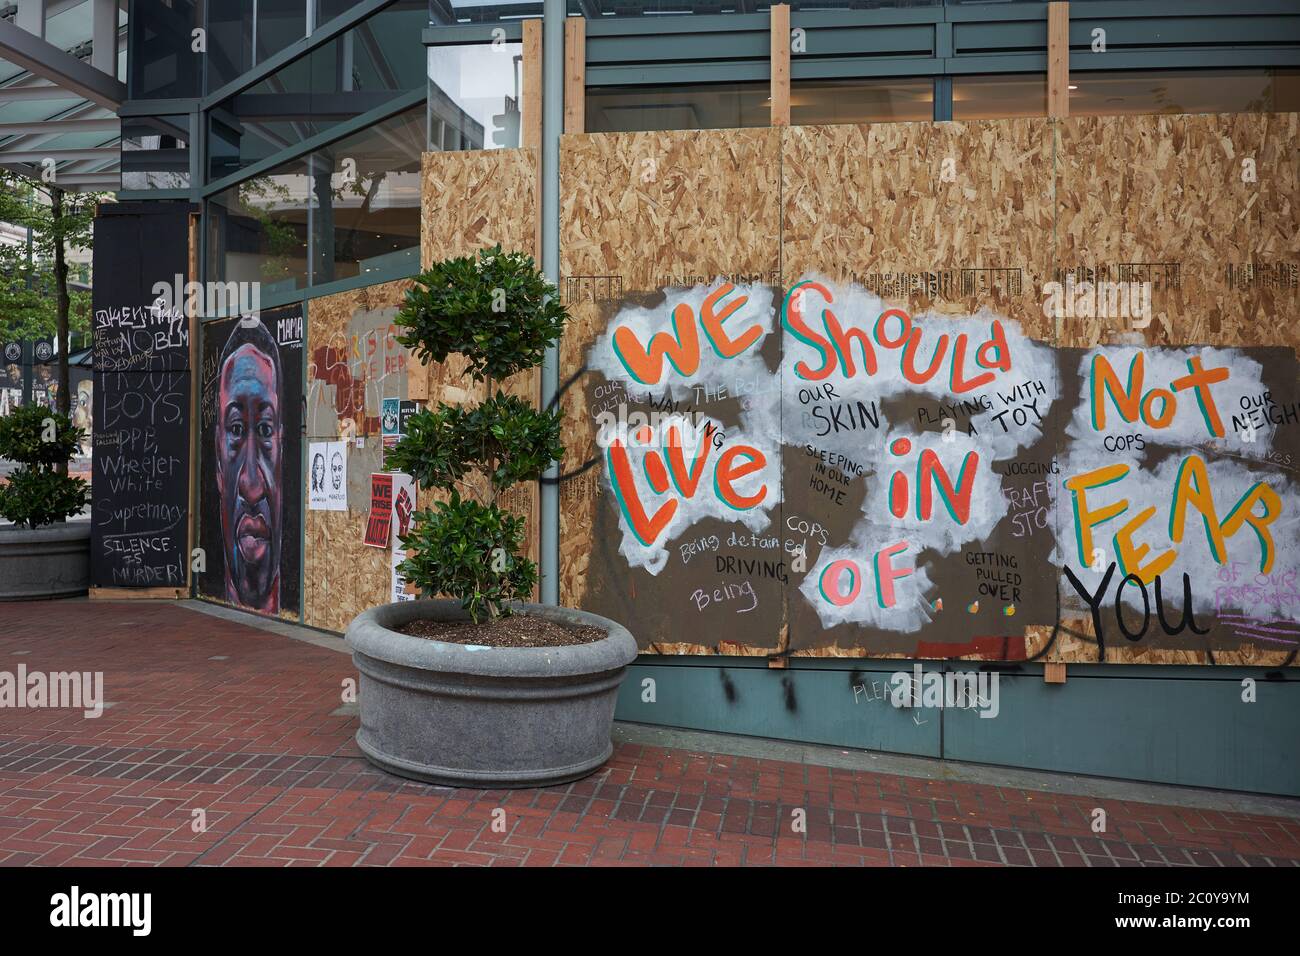 The boarded-up Louis Vuitton store in Pioneer Place in downtown Portland,  Oregon, which has become canvases for protest, seen on Friday, Jun 12, 2020  Stock Photo - Alamy